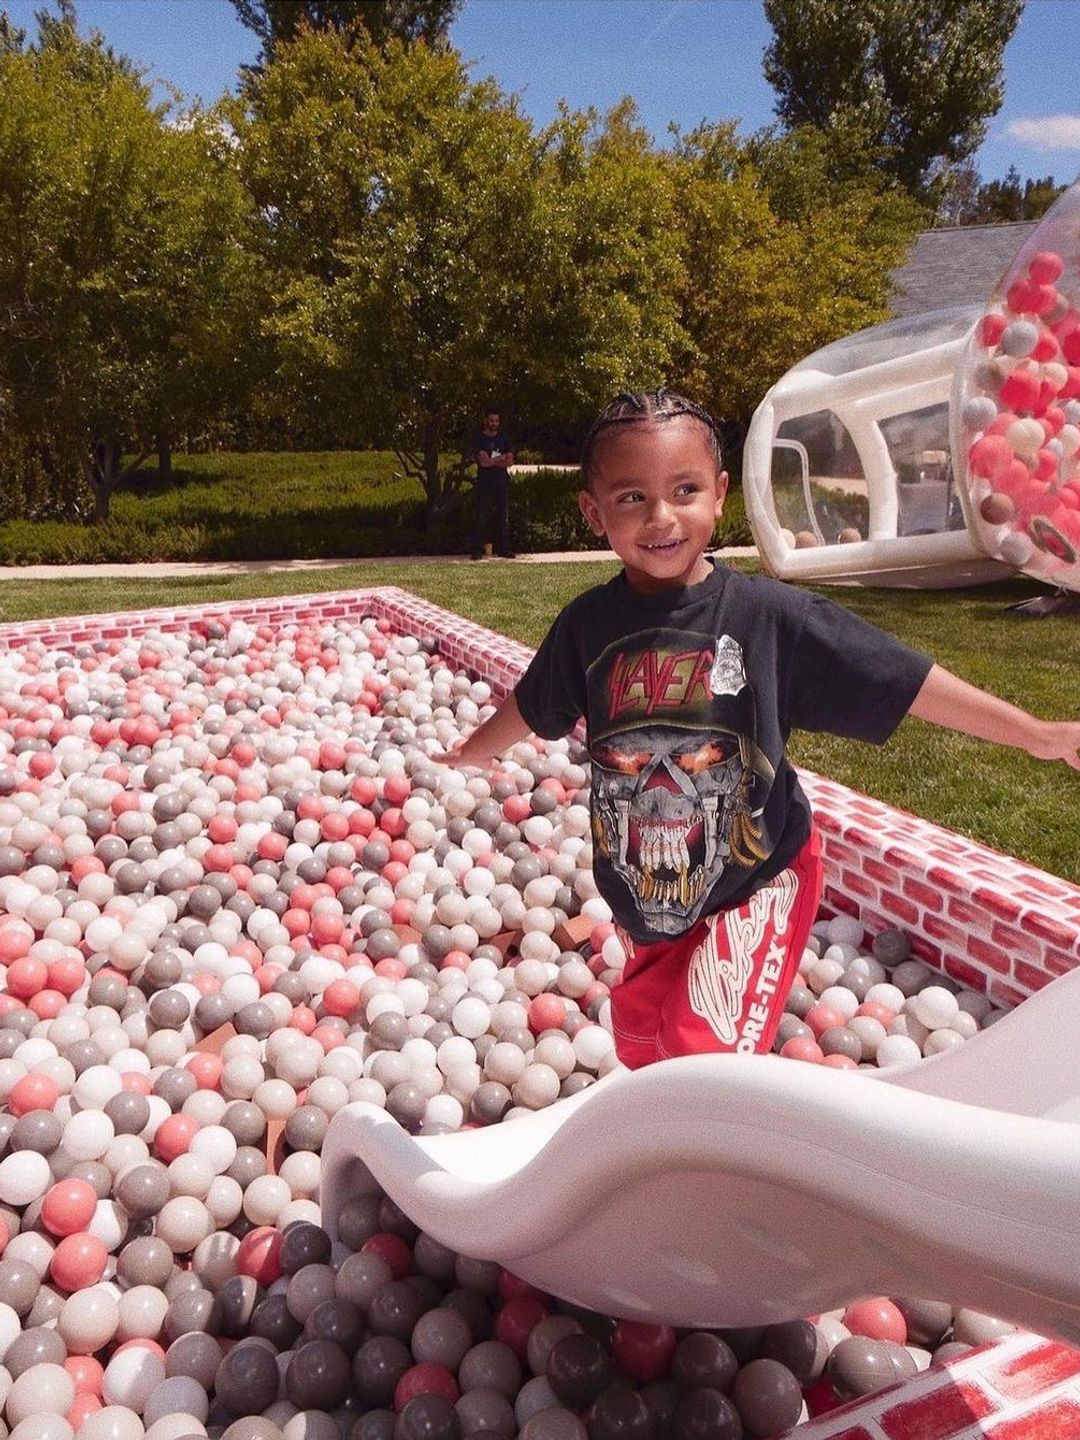 Psalm smiling in front of a red a white ball pit